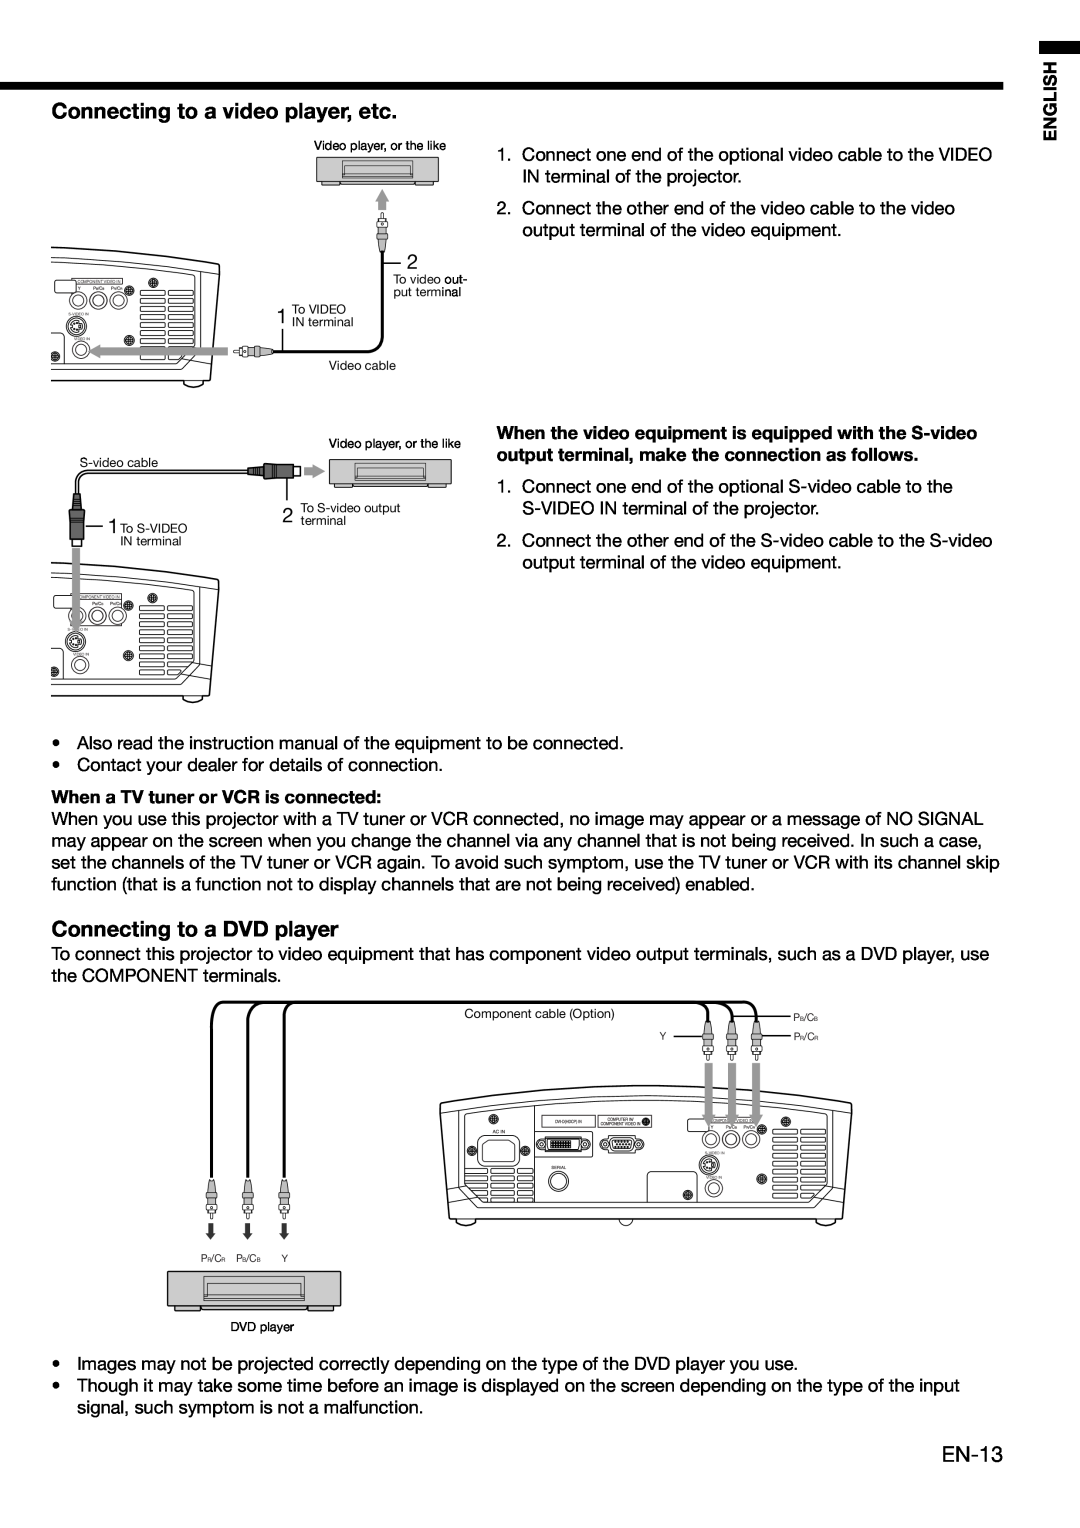 Mitsubishi Electronics HC910 user manual Connecting to a video player, etc, Connecting to a DVD player, EN-13, English 